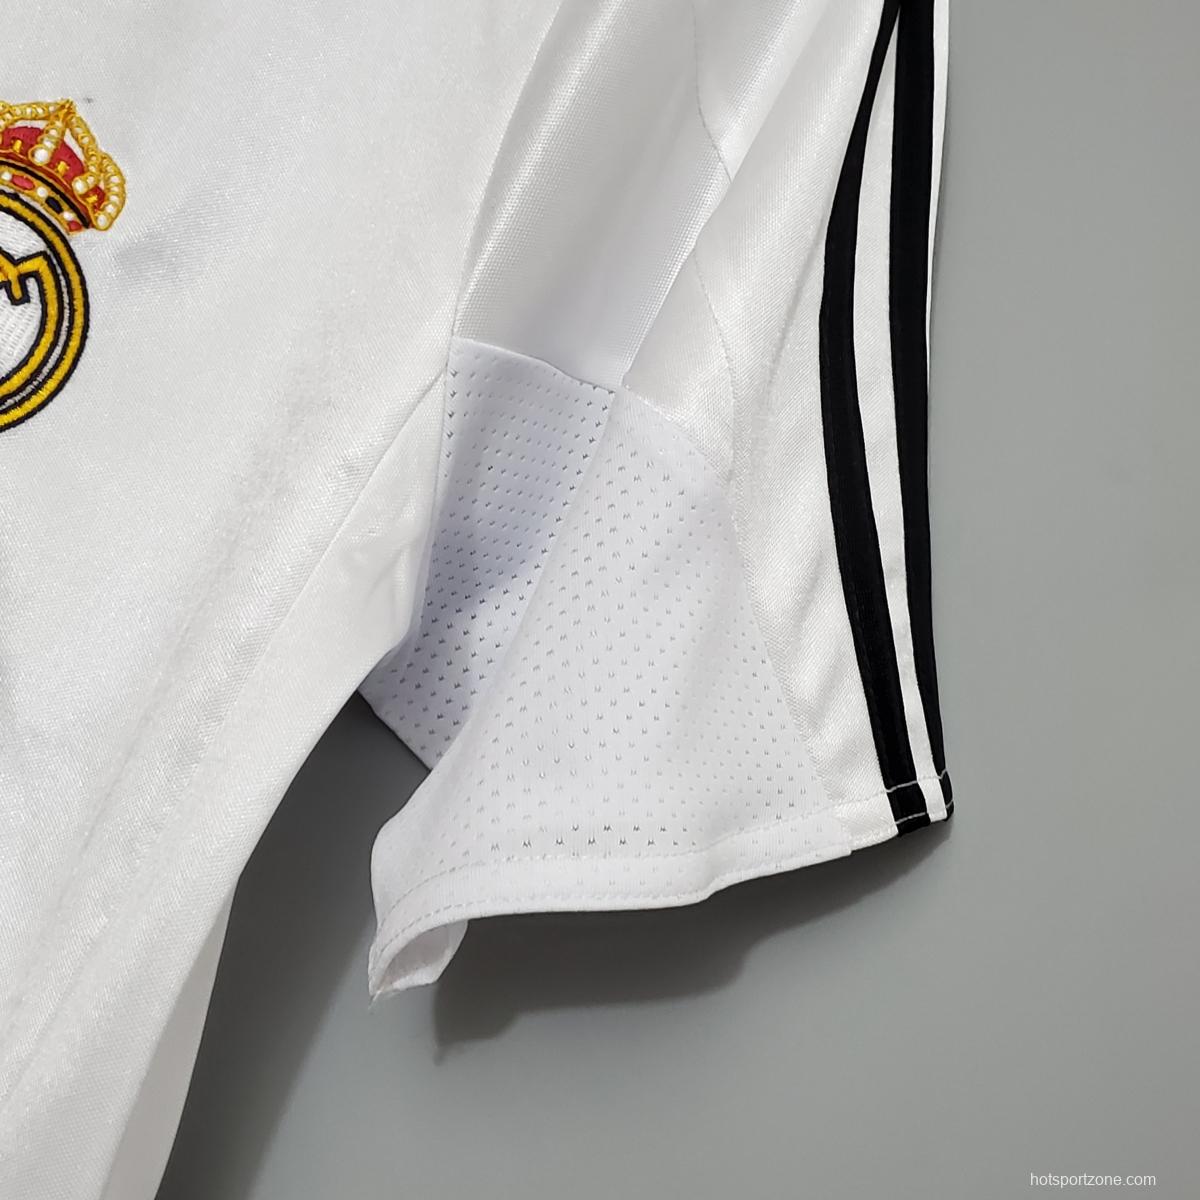 Retro 04/05 Real Madrid home Soccer Jersey